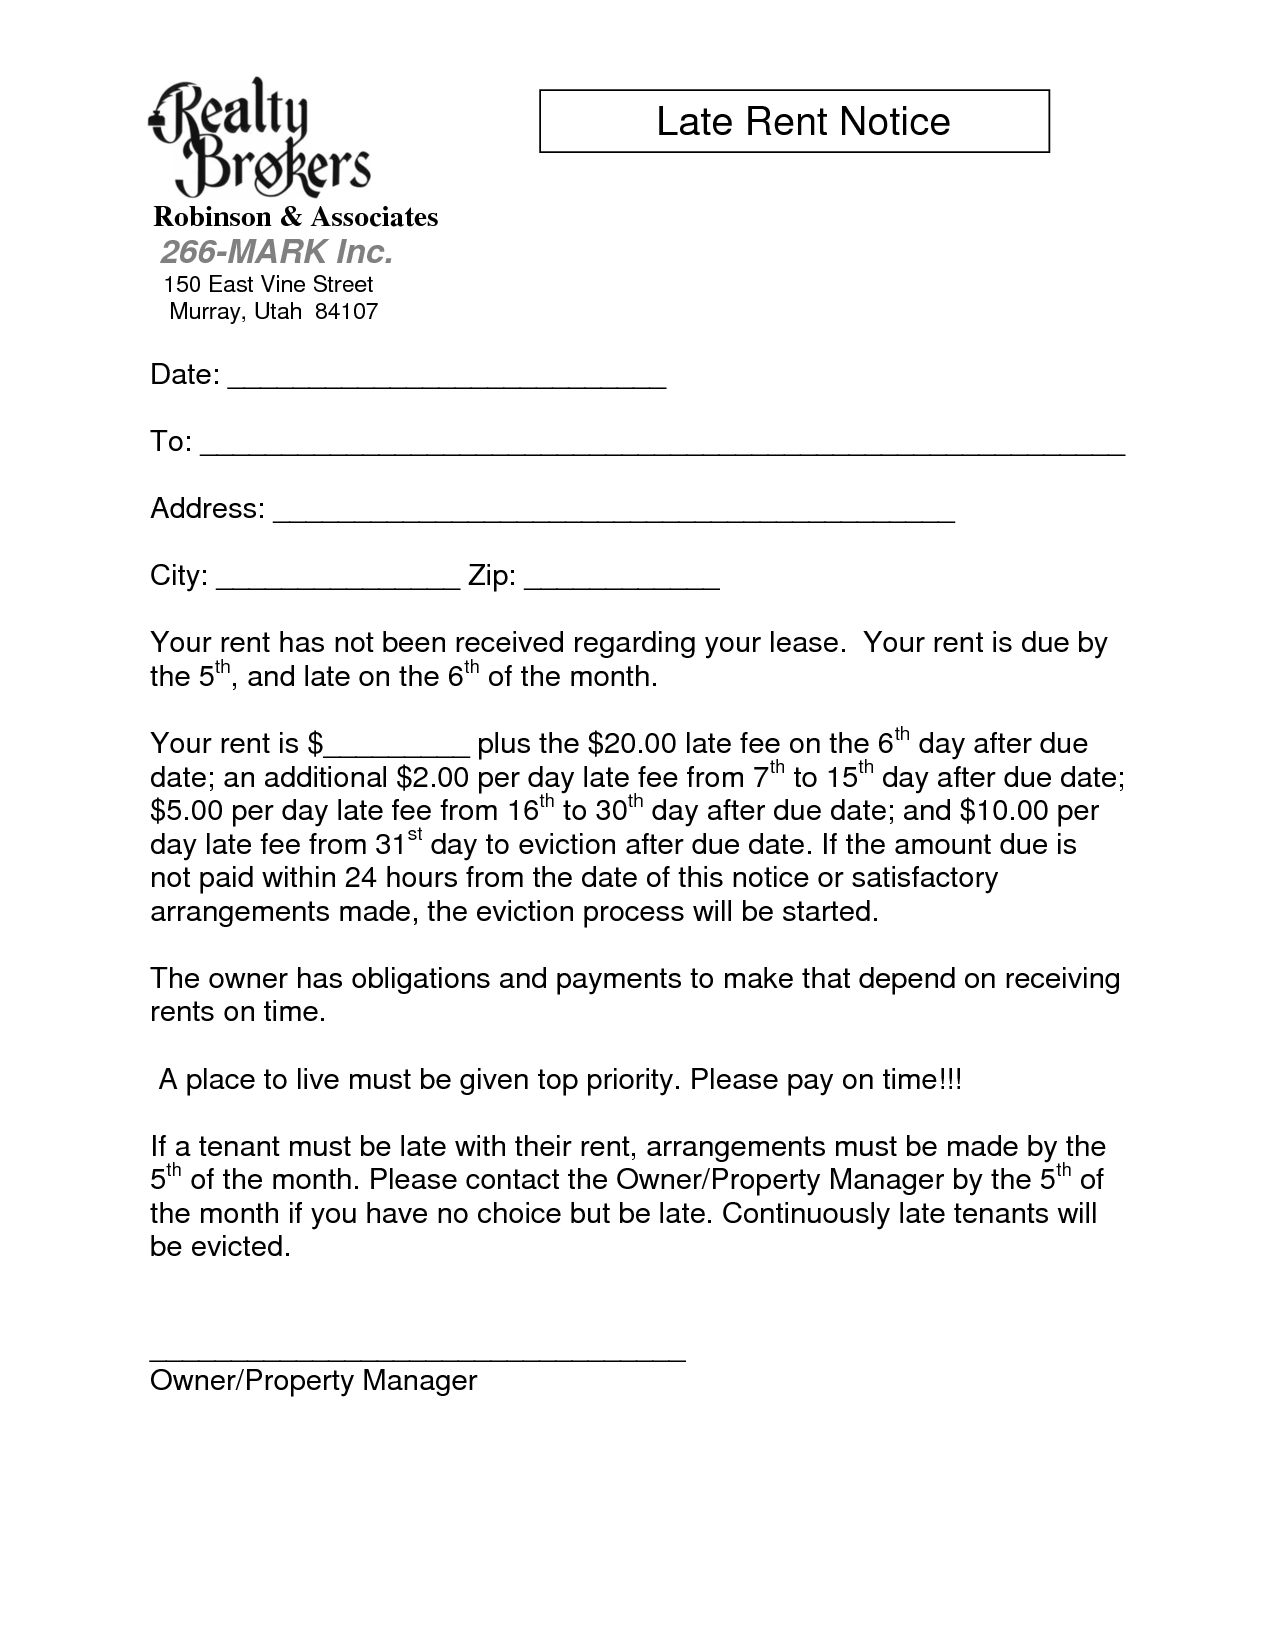 late-rent-notice-template-free-luxury-sample-printable-notice-of